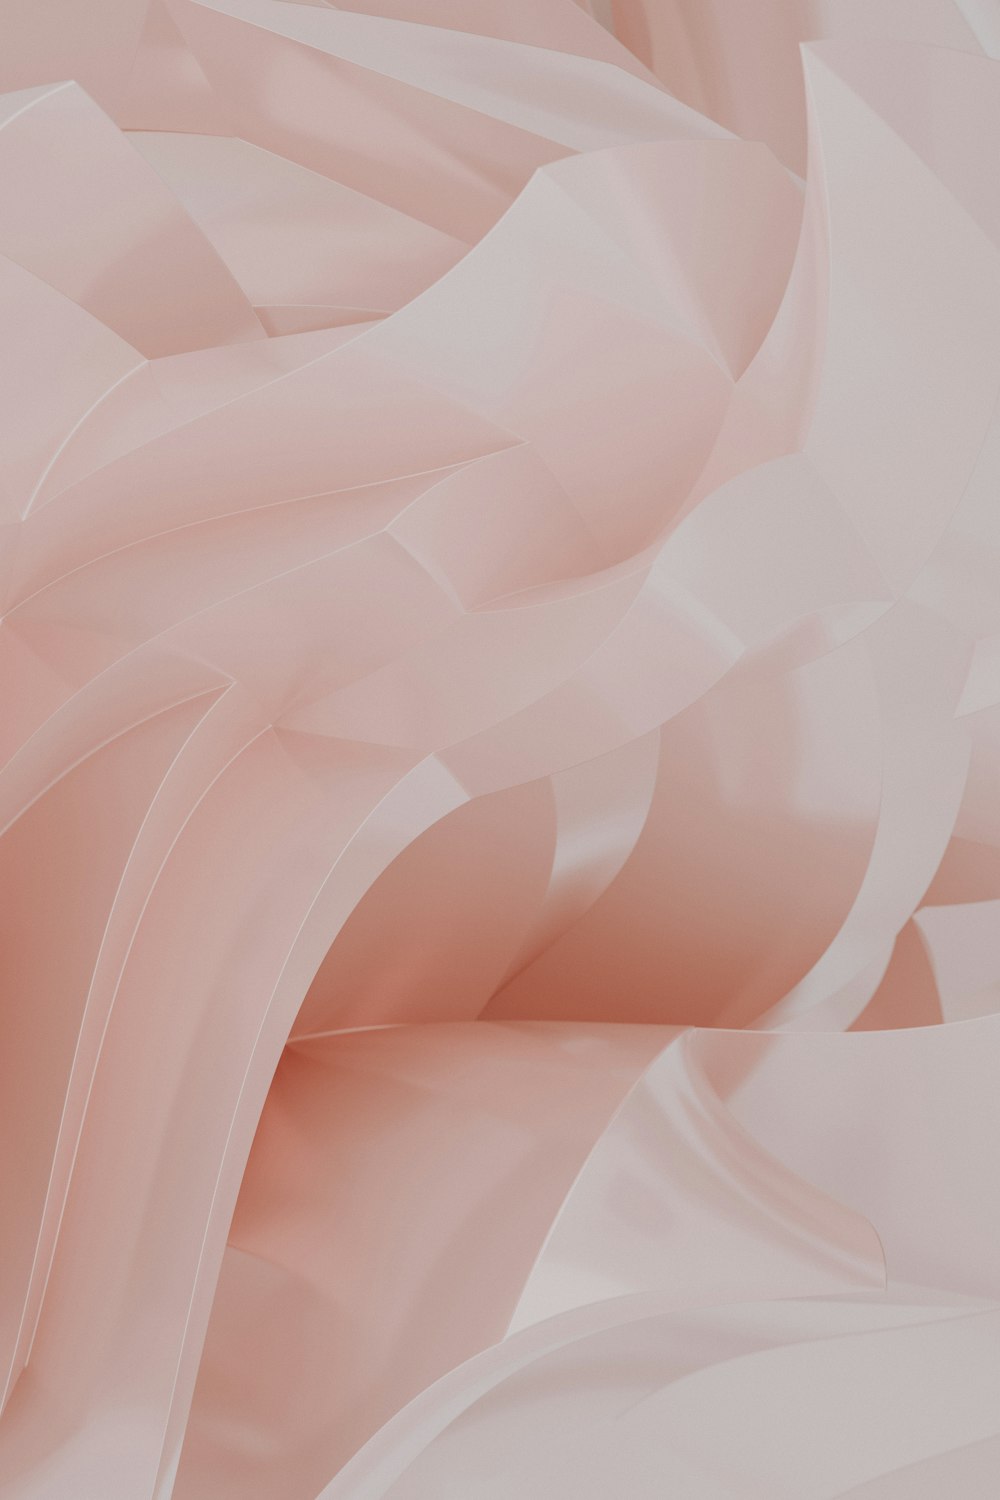 an abstract photo of a pink fabric